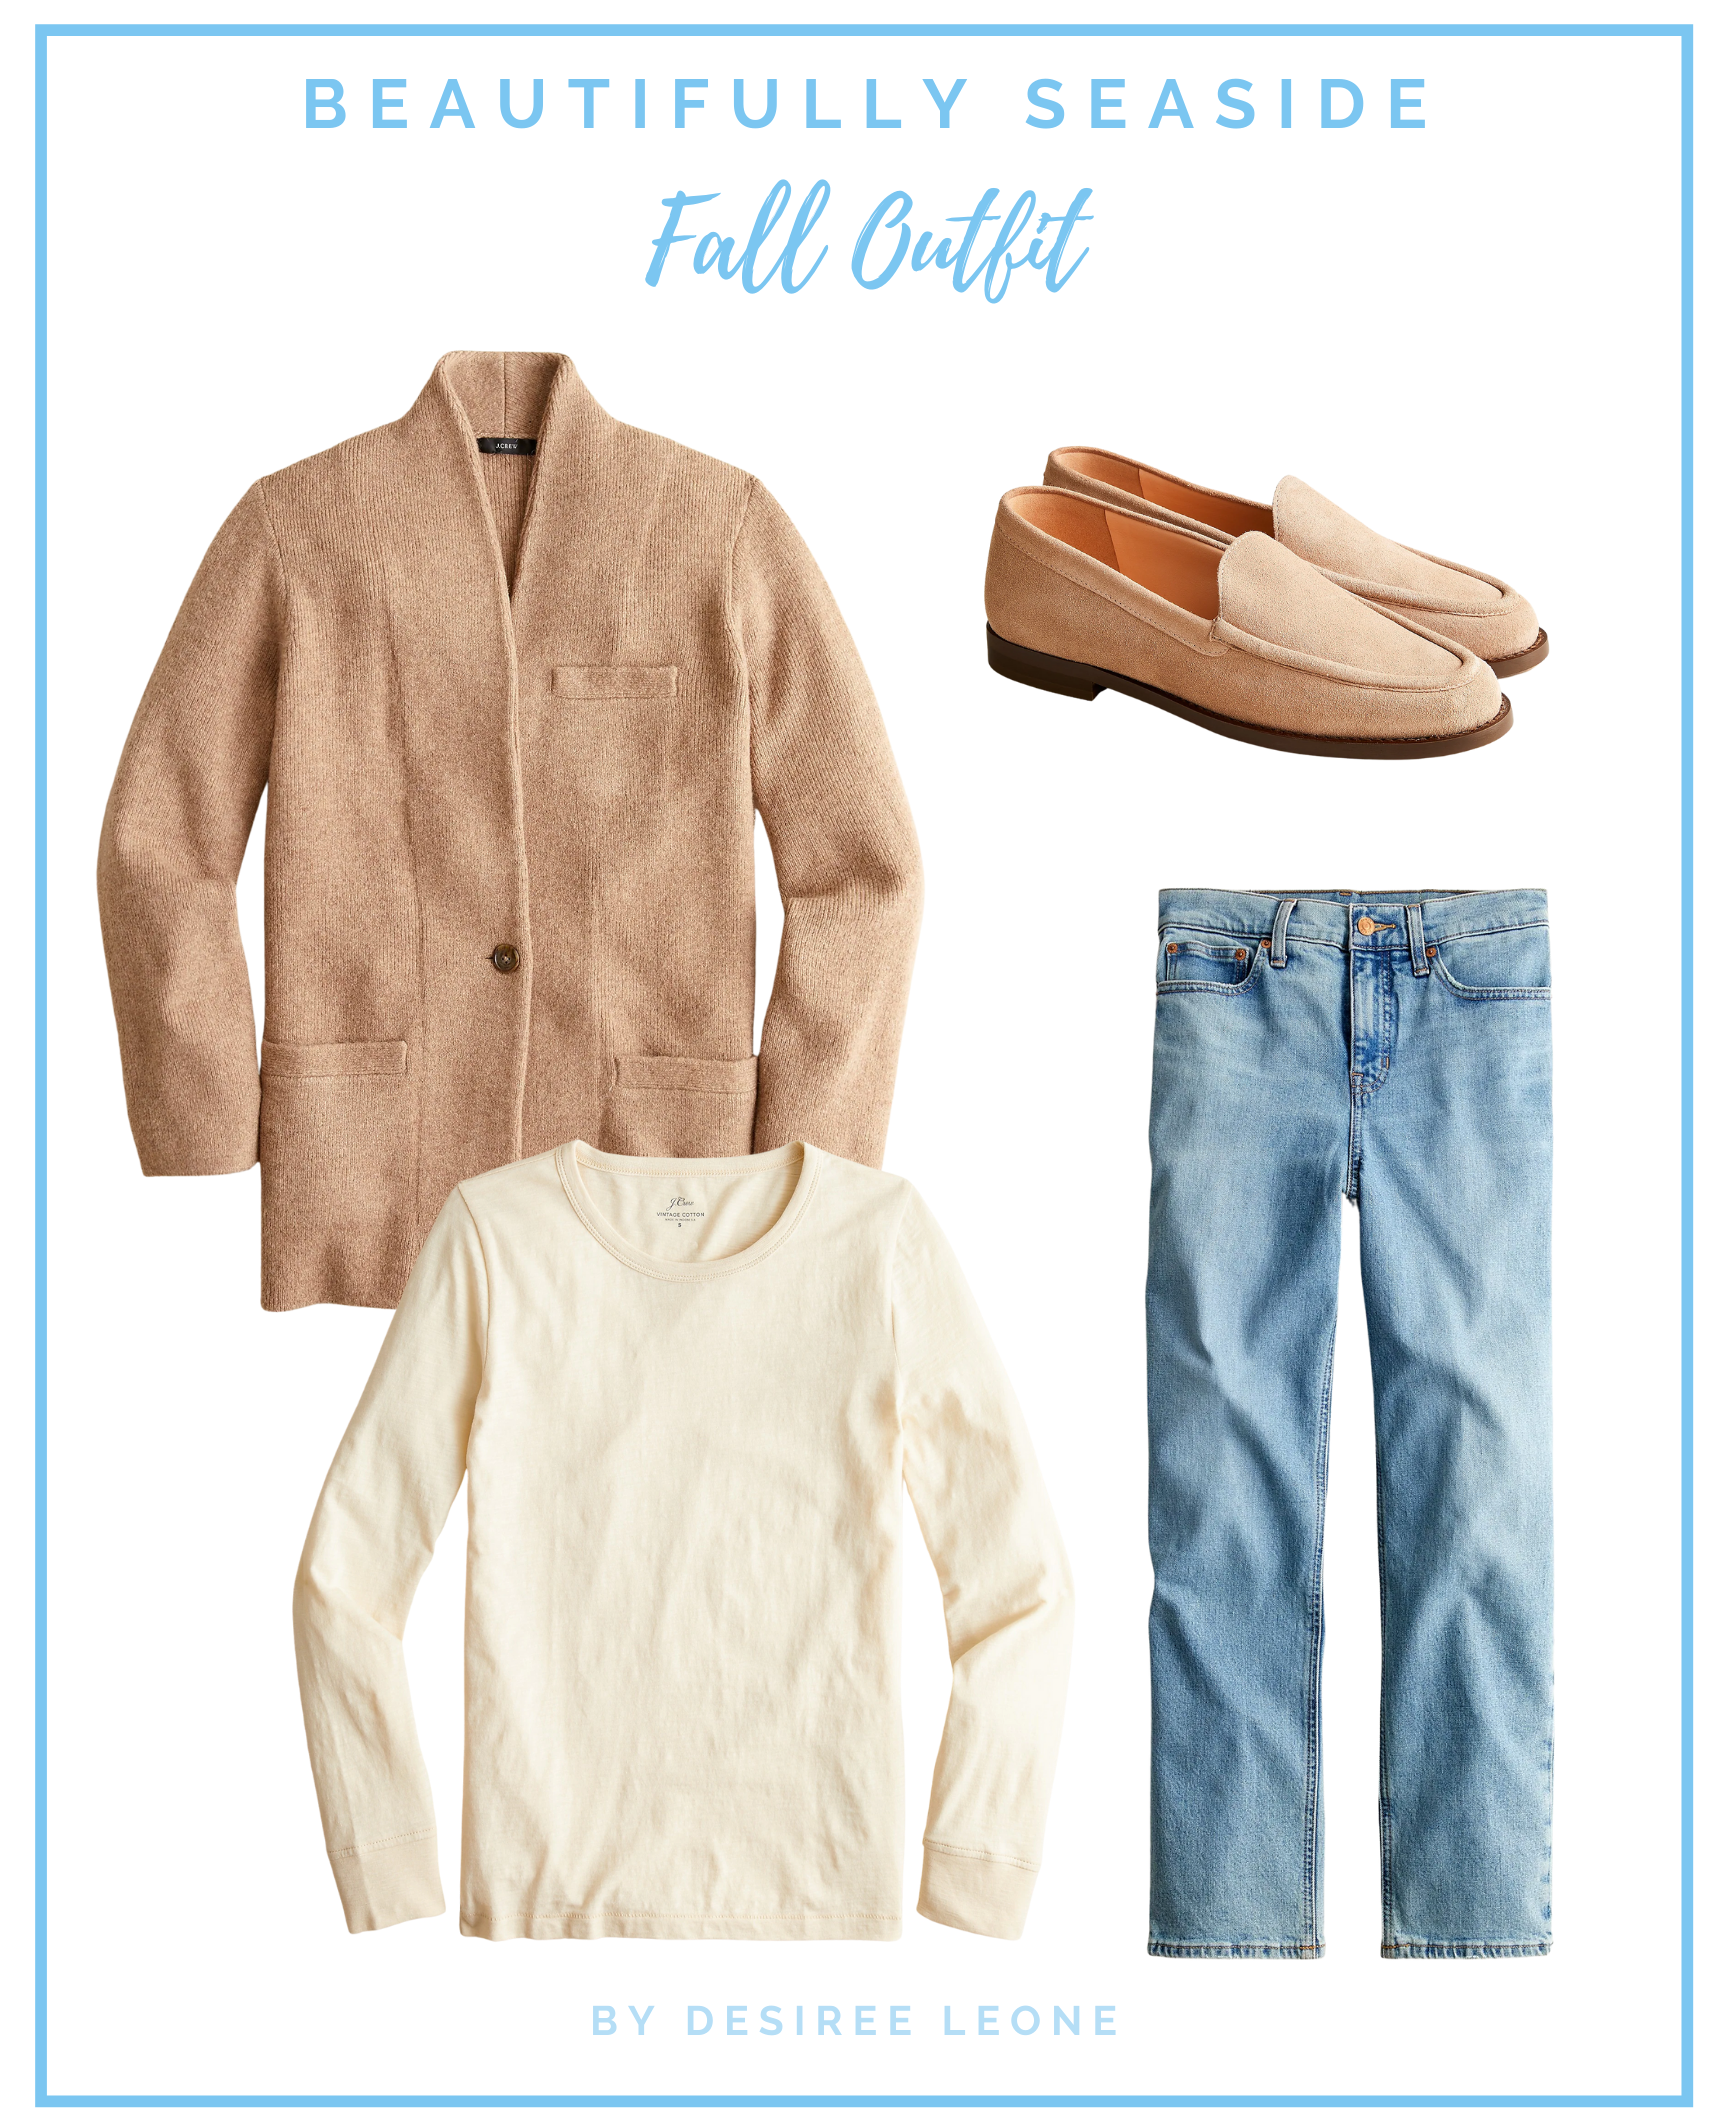 10 cute fall outfits ideas. Looking for casual fall outfit ideas